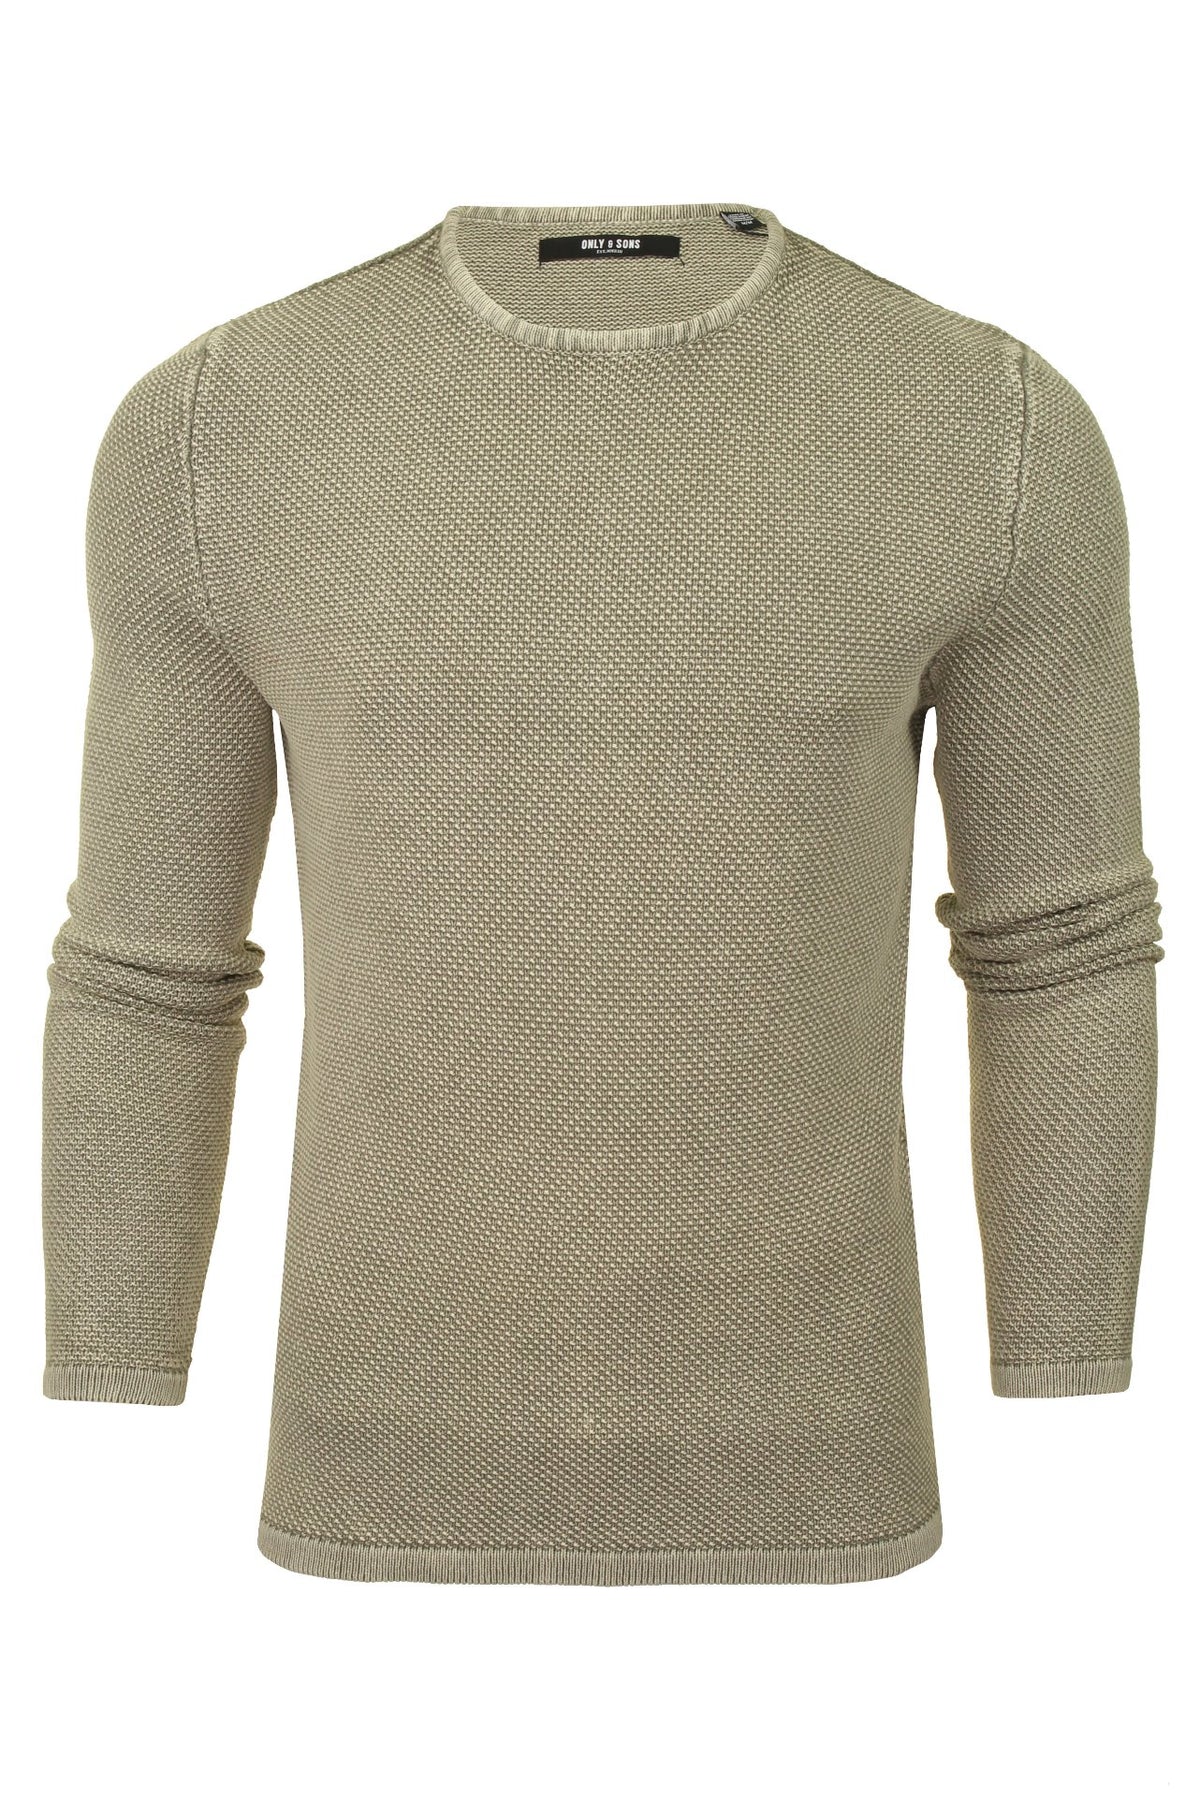 Only & Sons Mens Crew Neck Knit Jumper 'ONSHUGH' (Griffin, XL), 01, 22007422, Griffin